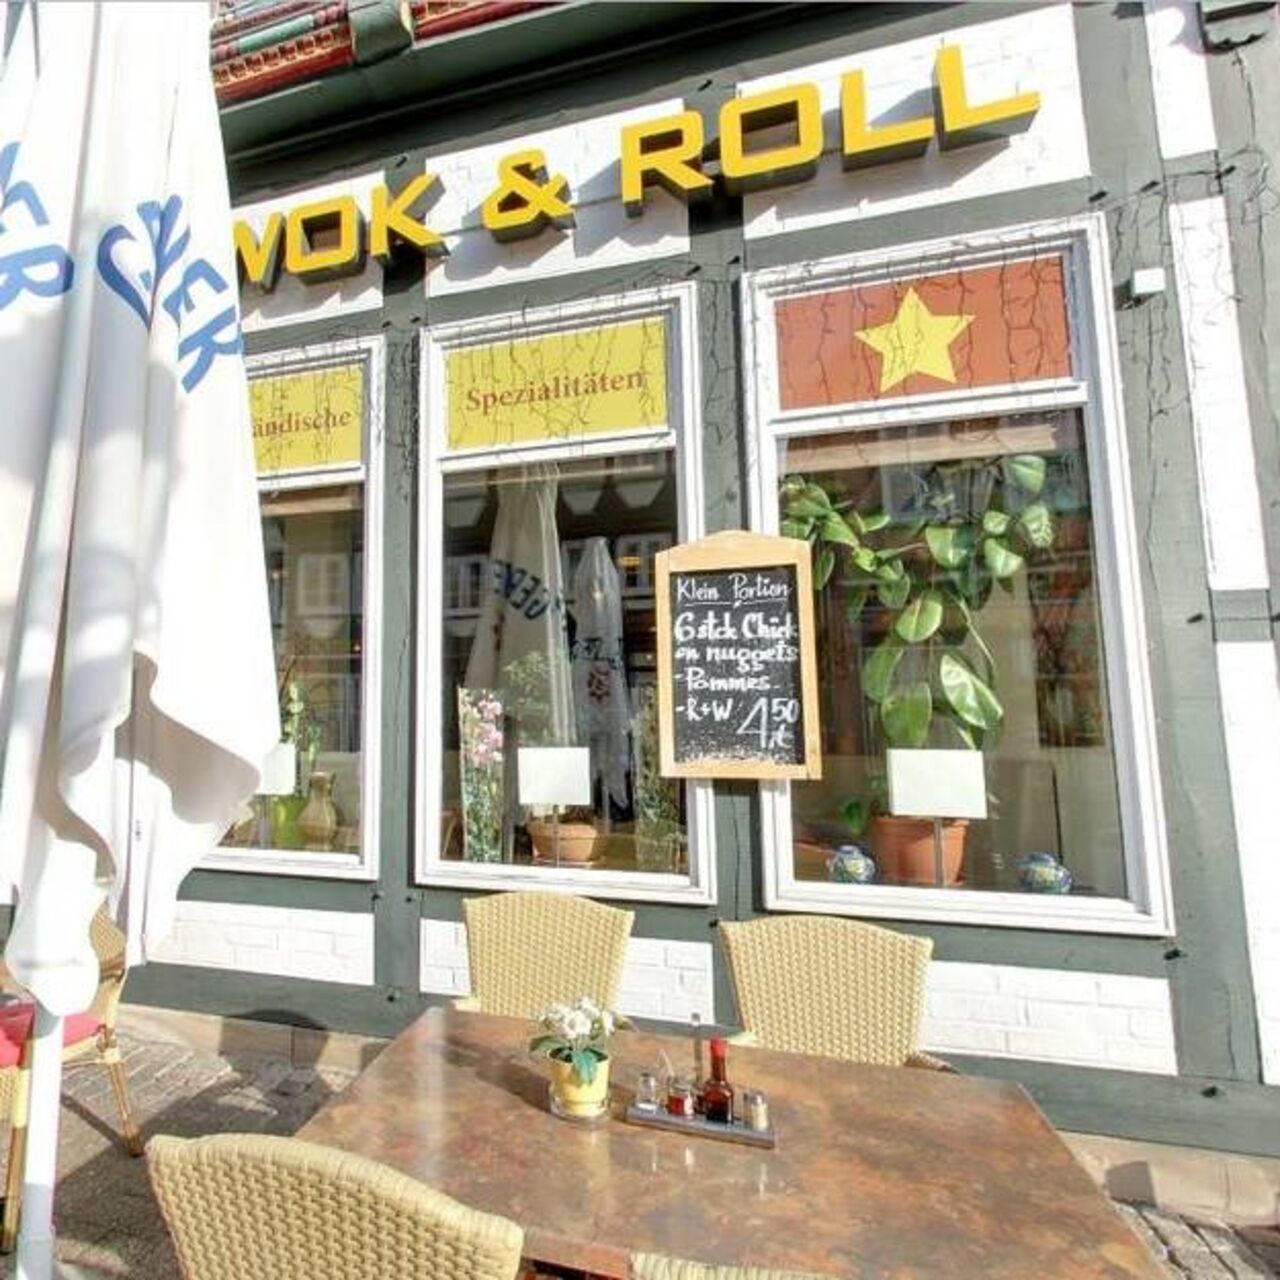 A photo of Wok & Roll